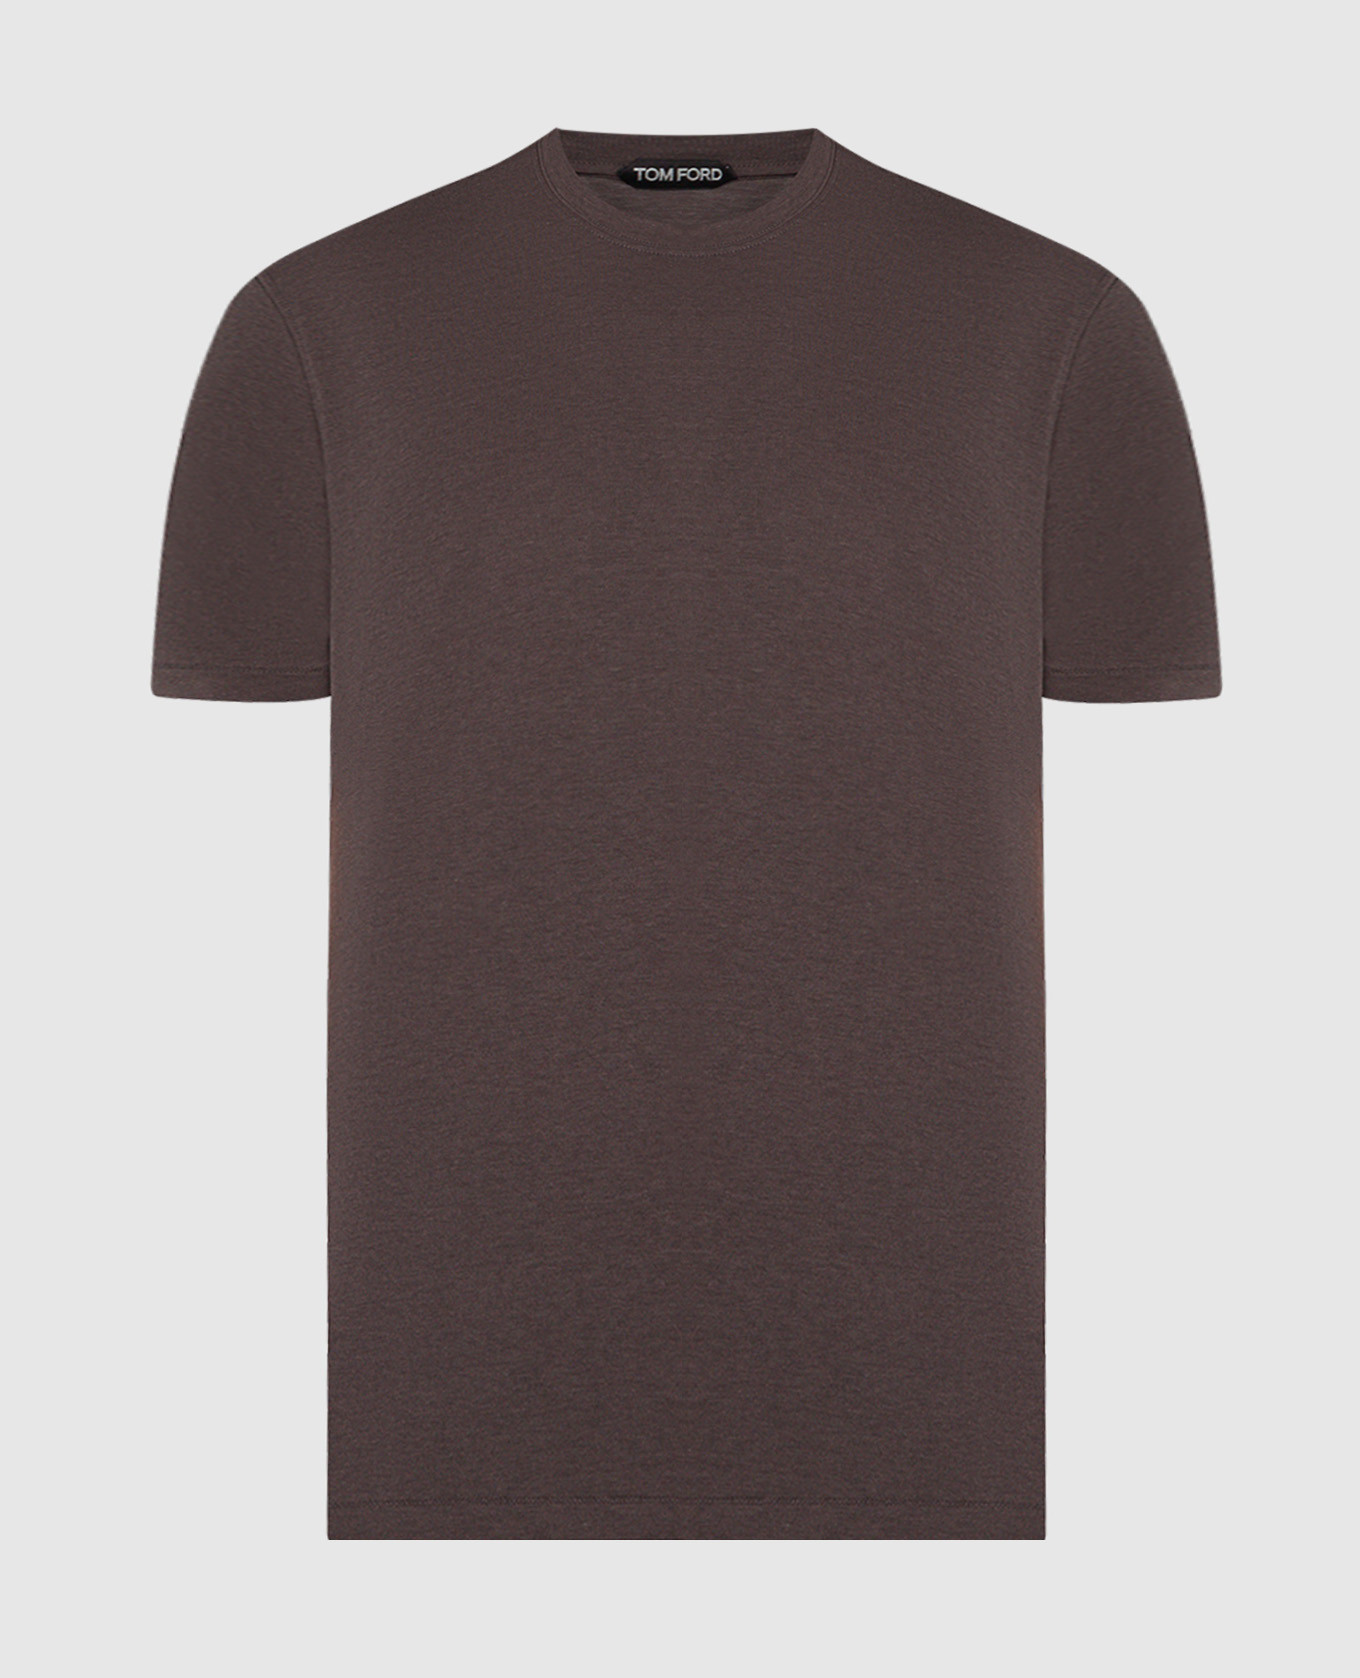 Brown t-shirt with logo embroidery